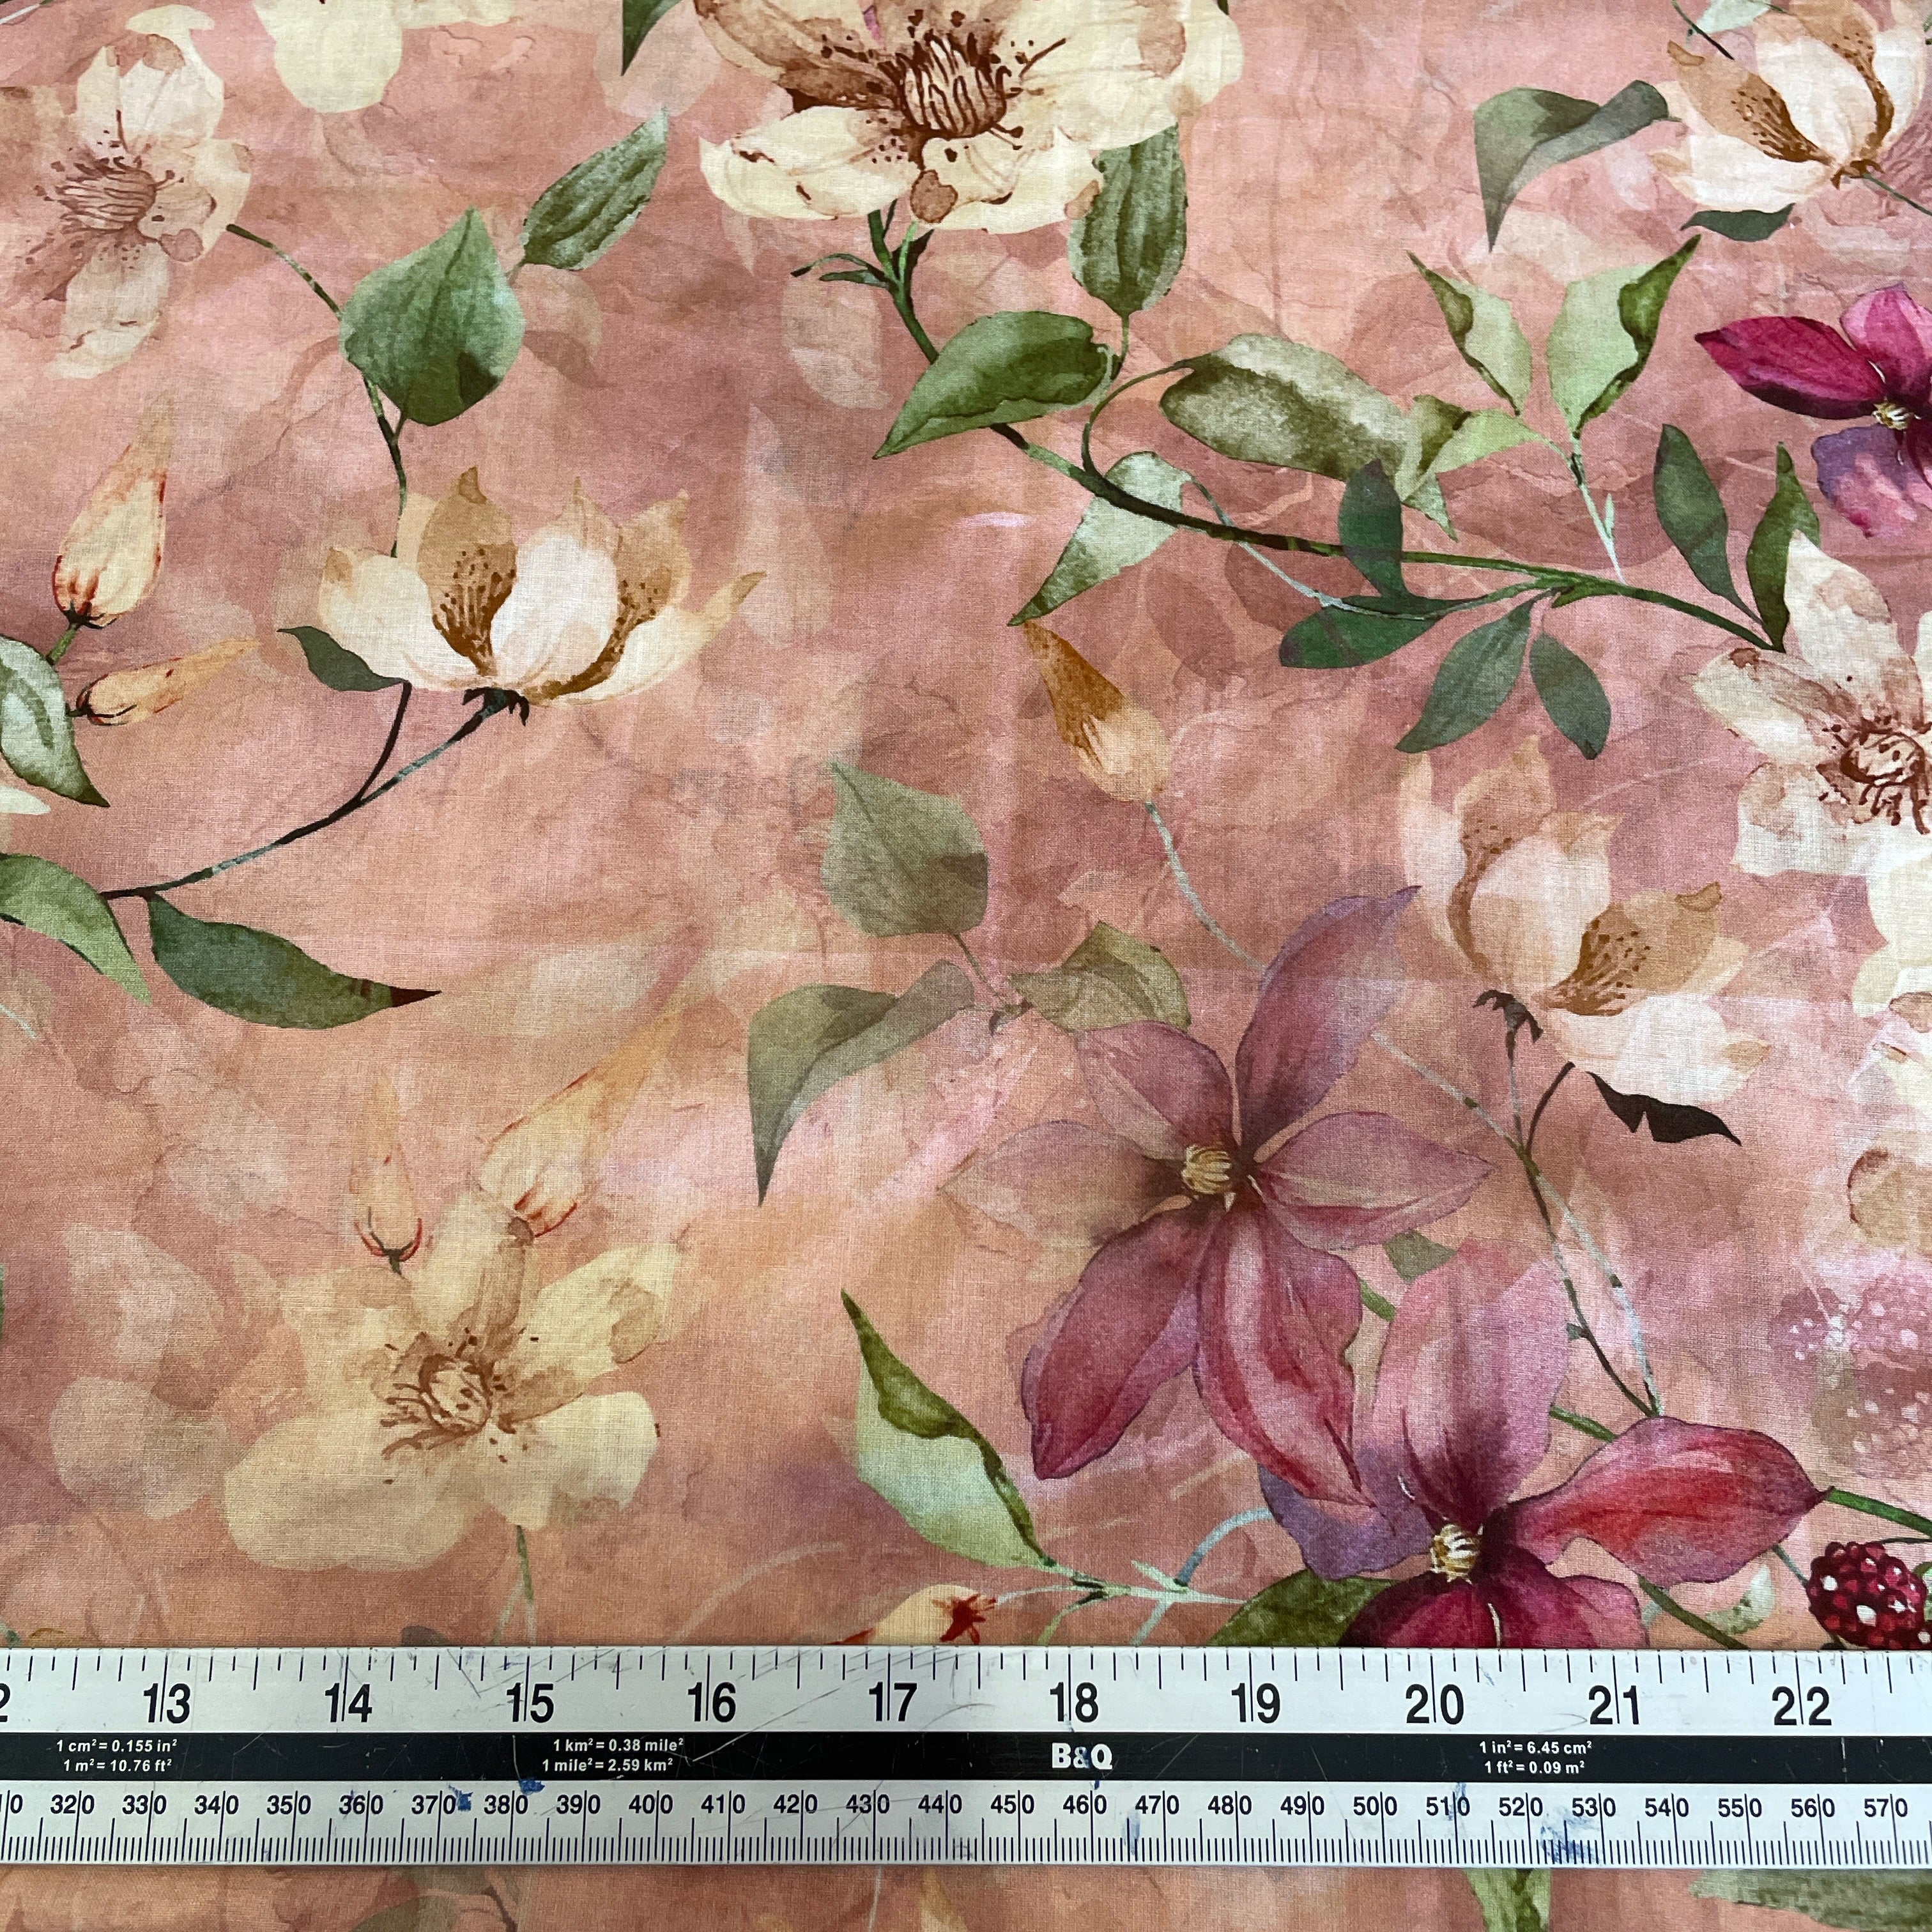 Luxurious peach Digital Cotton Lawn floral prints are lightweight and soft with beautiful drape – perfect for dresses, blouses, skirts and crafts. At a width of 135cm / 53" and a weight of 75gsm